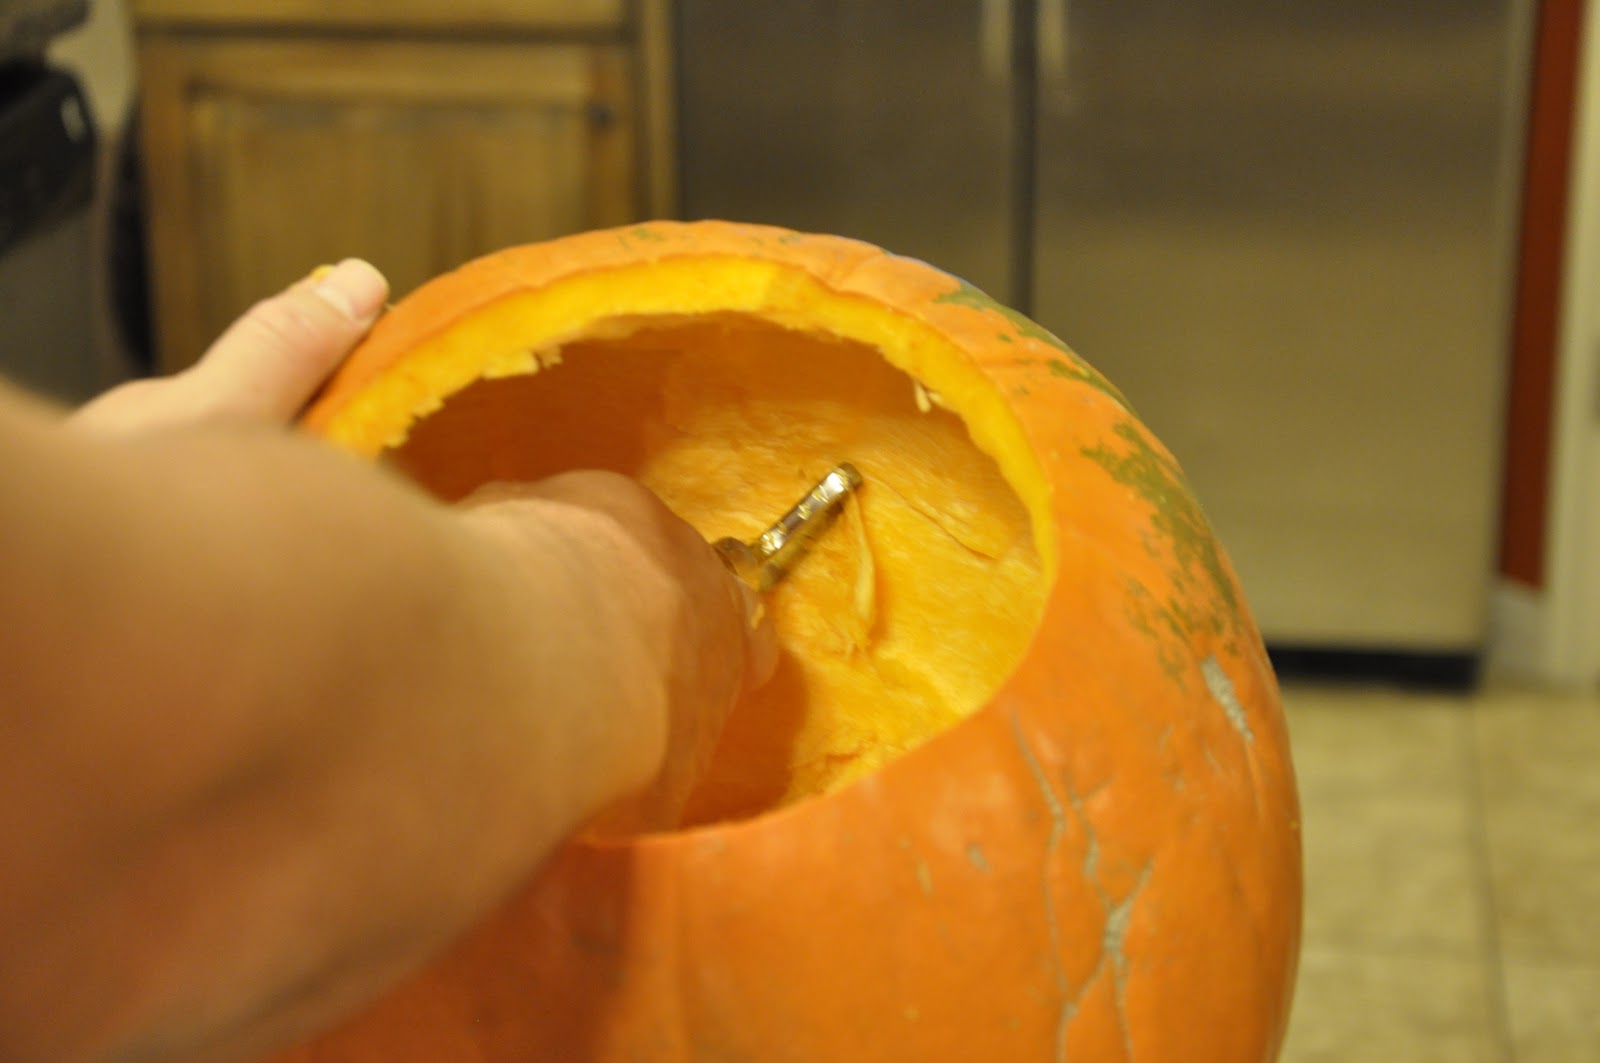 Pumpkin Carving Instructions: All Things Spooky